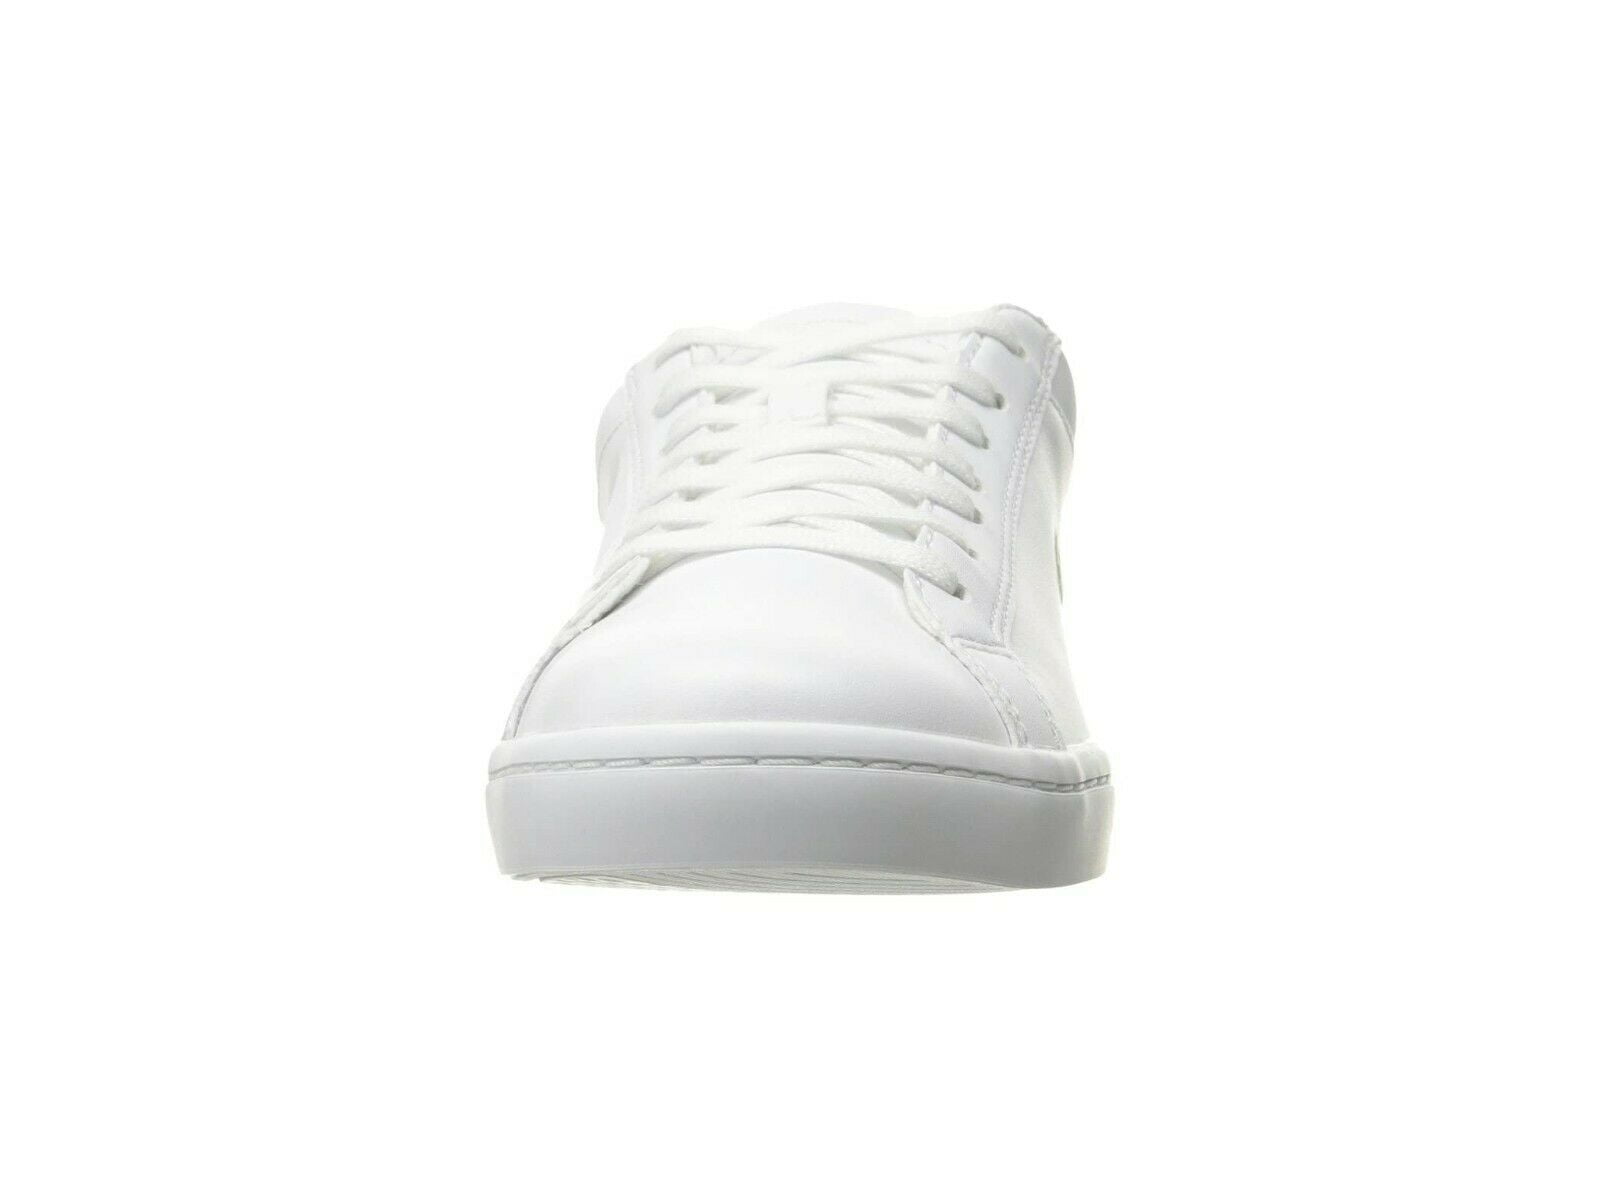 forestille talsmand Banke Lacoste Straightset BL 1 Men's Casual Leather Sneakers 33CAM1070001 -  Walmart.com